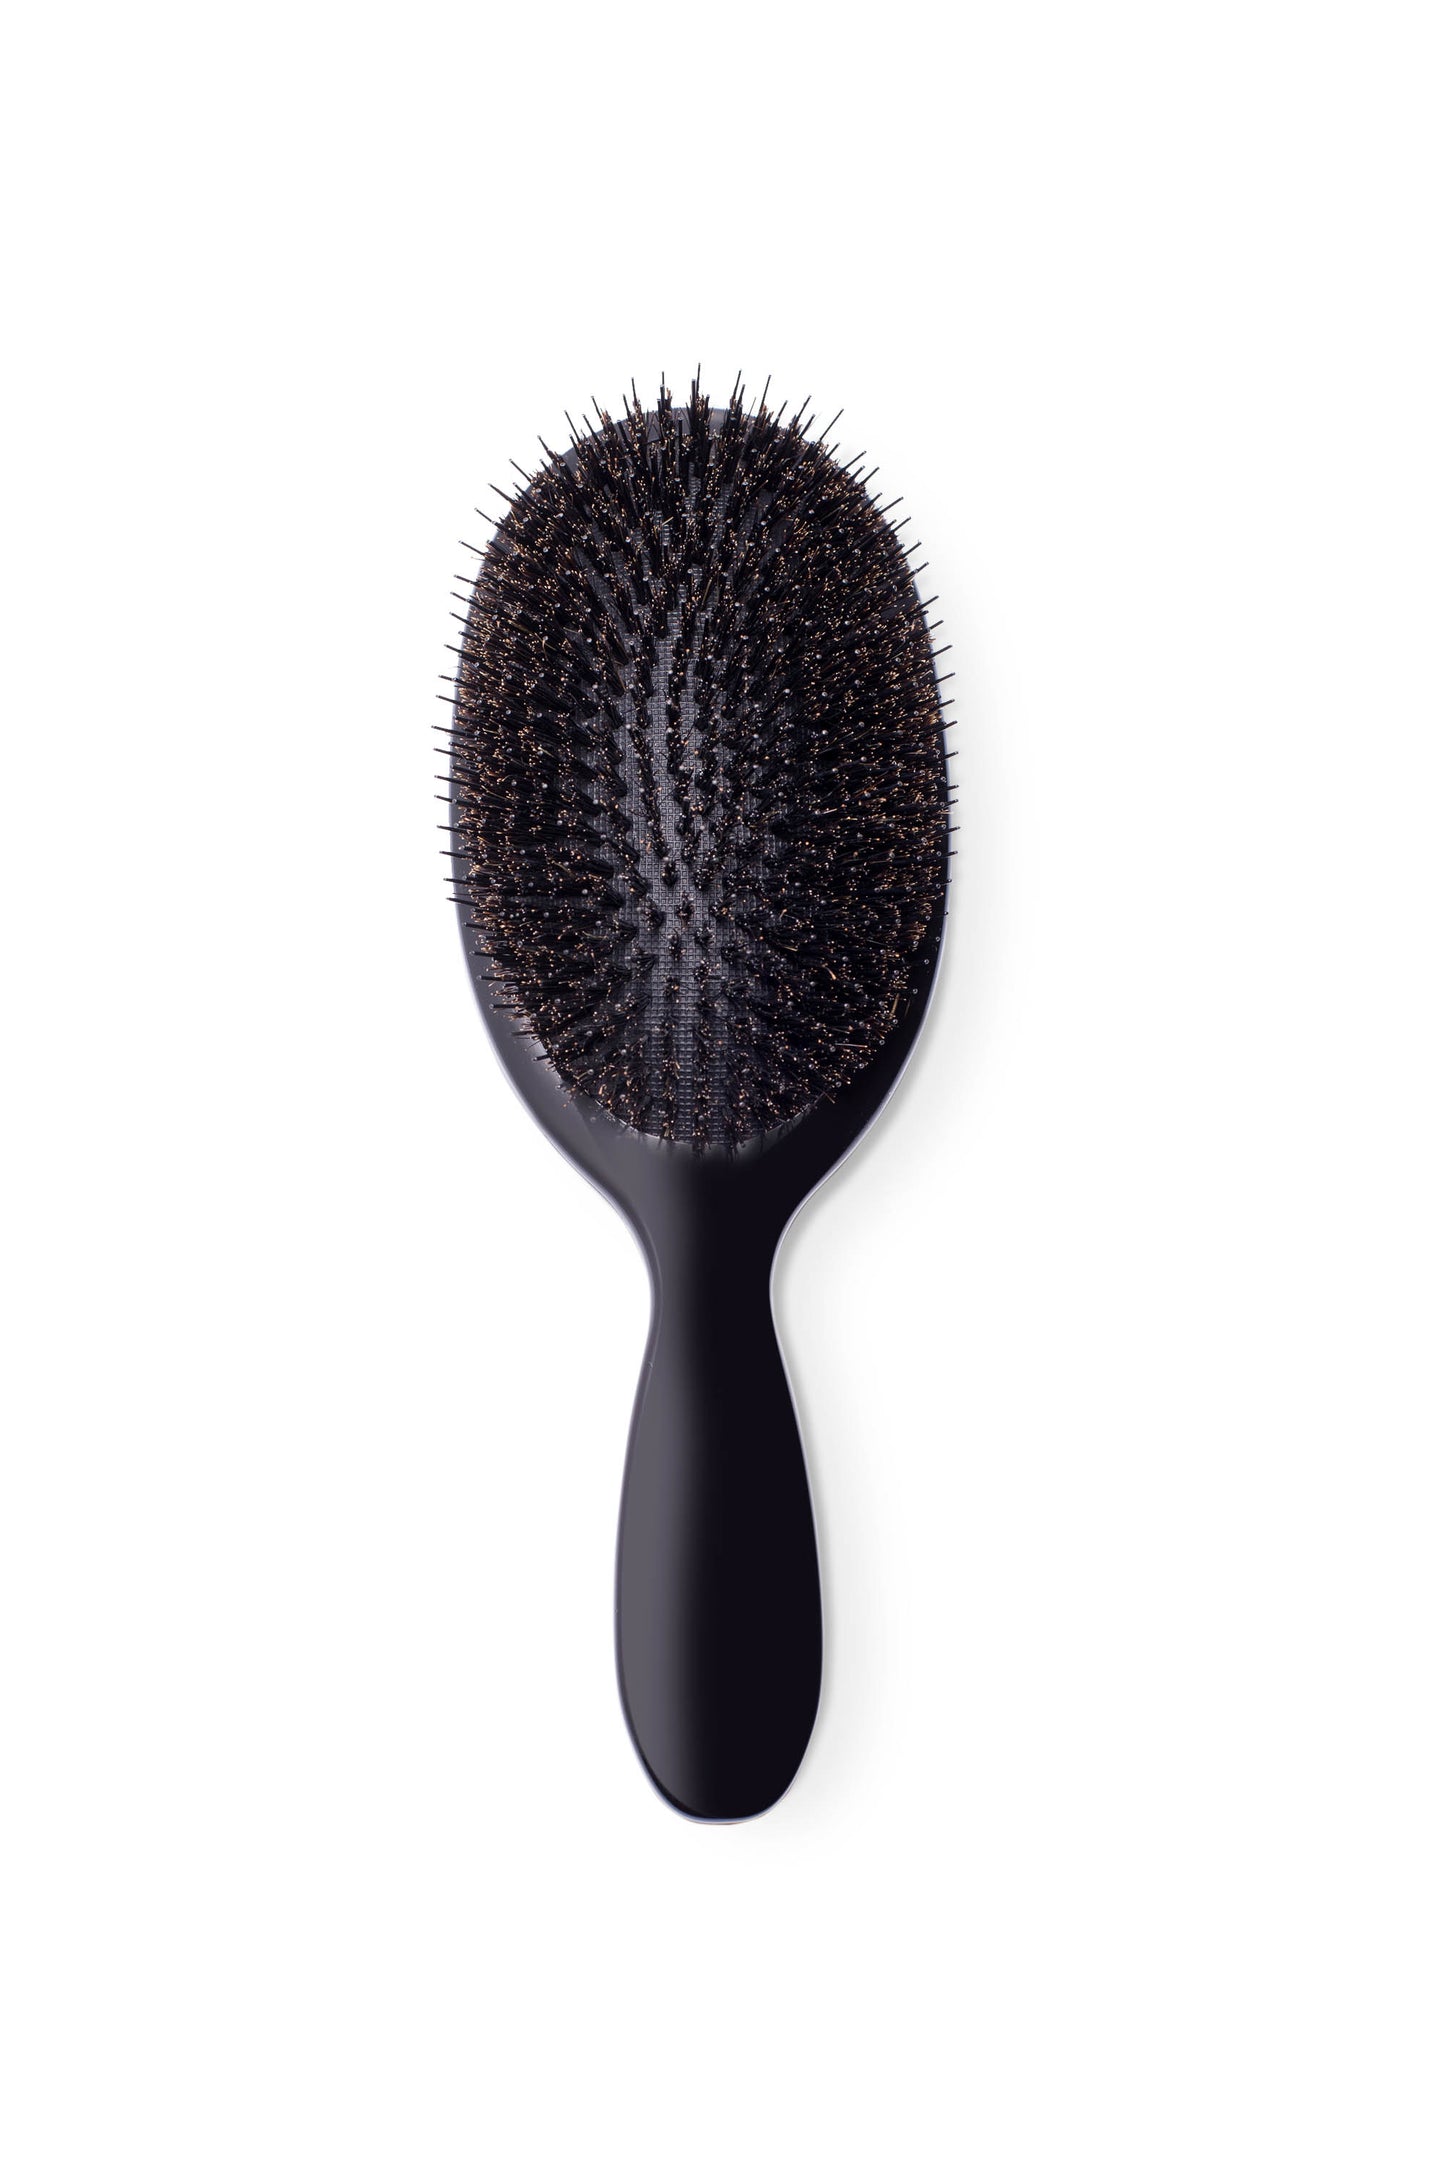 HLA BROSSE - SPECIALE EXTENSIONS